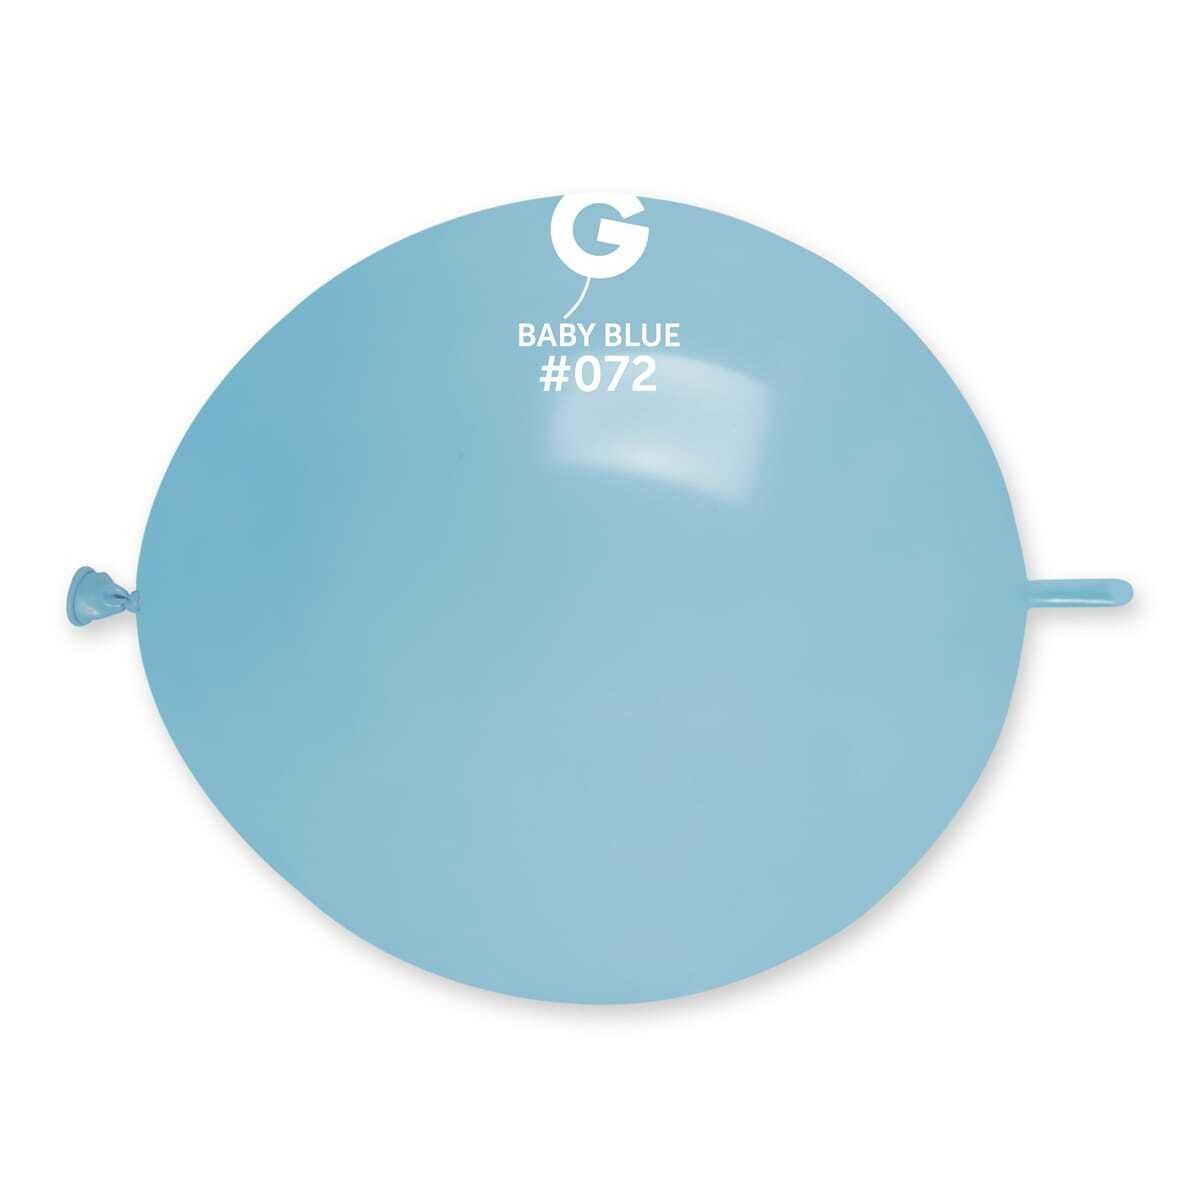 Gemar Latex Balloons Standard Baby Blue #072 13in - 50 pieces